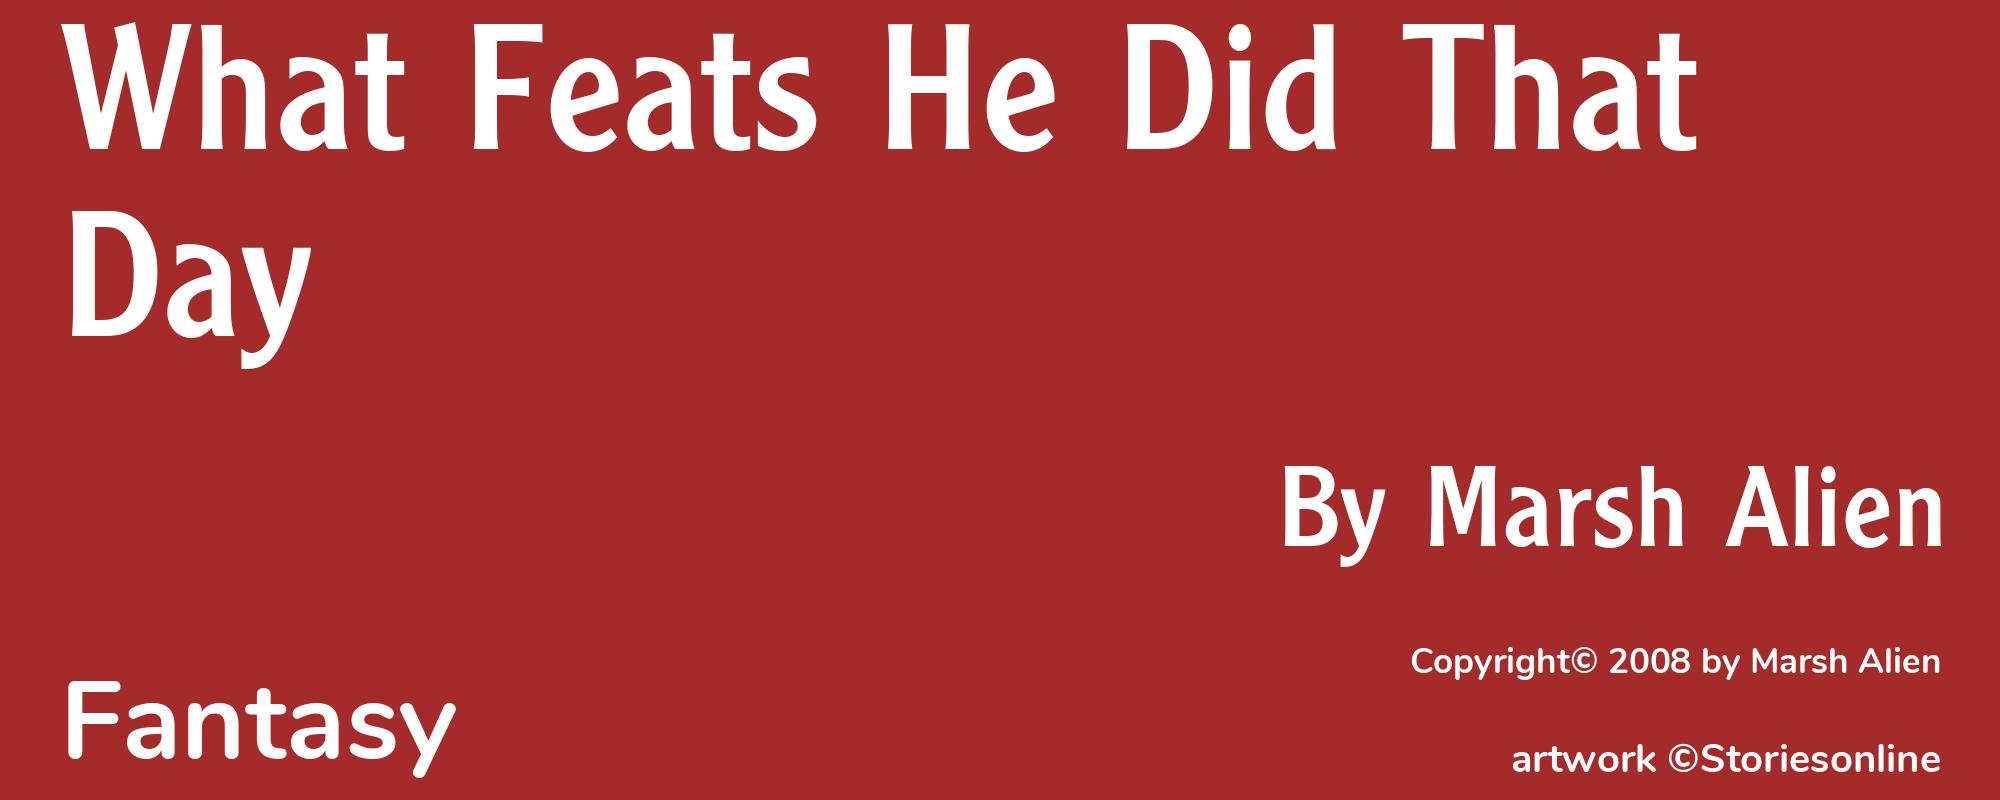 What Feats He Did That Day - Cover